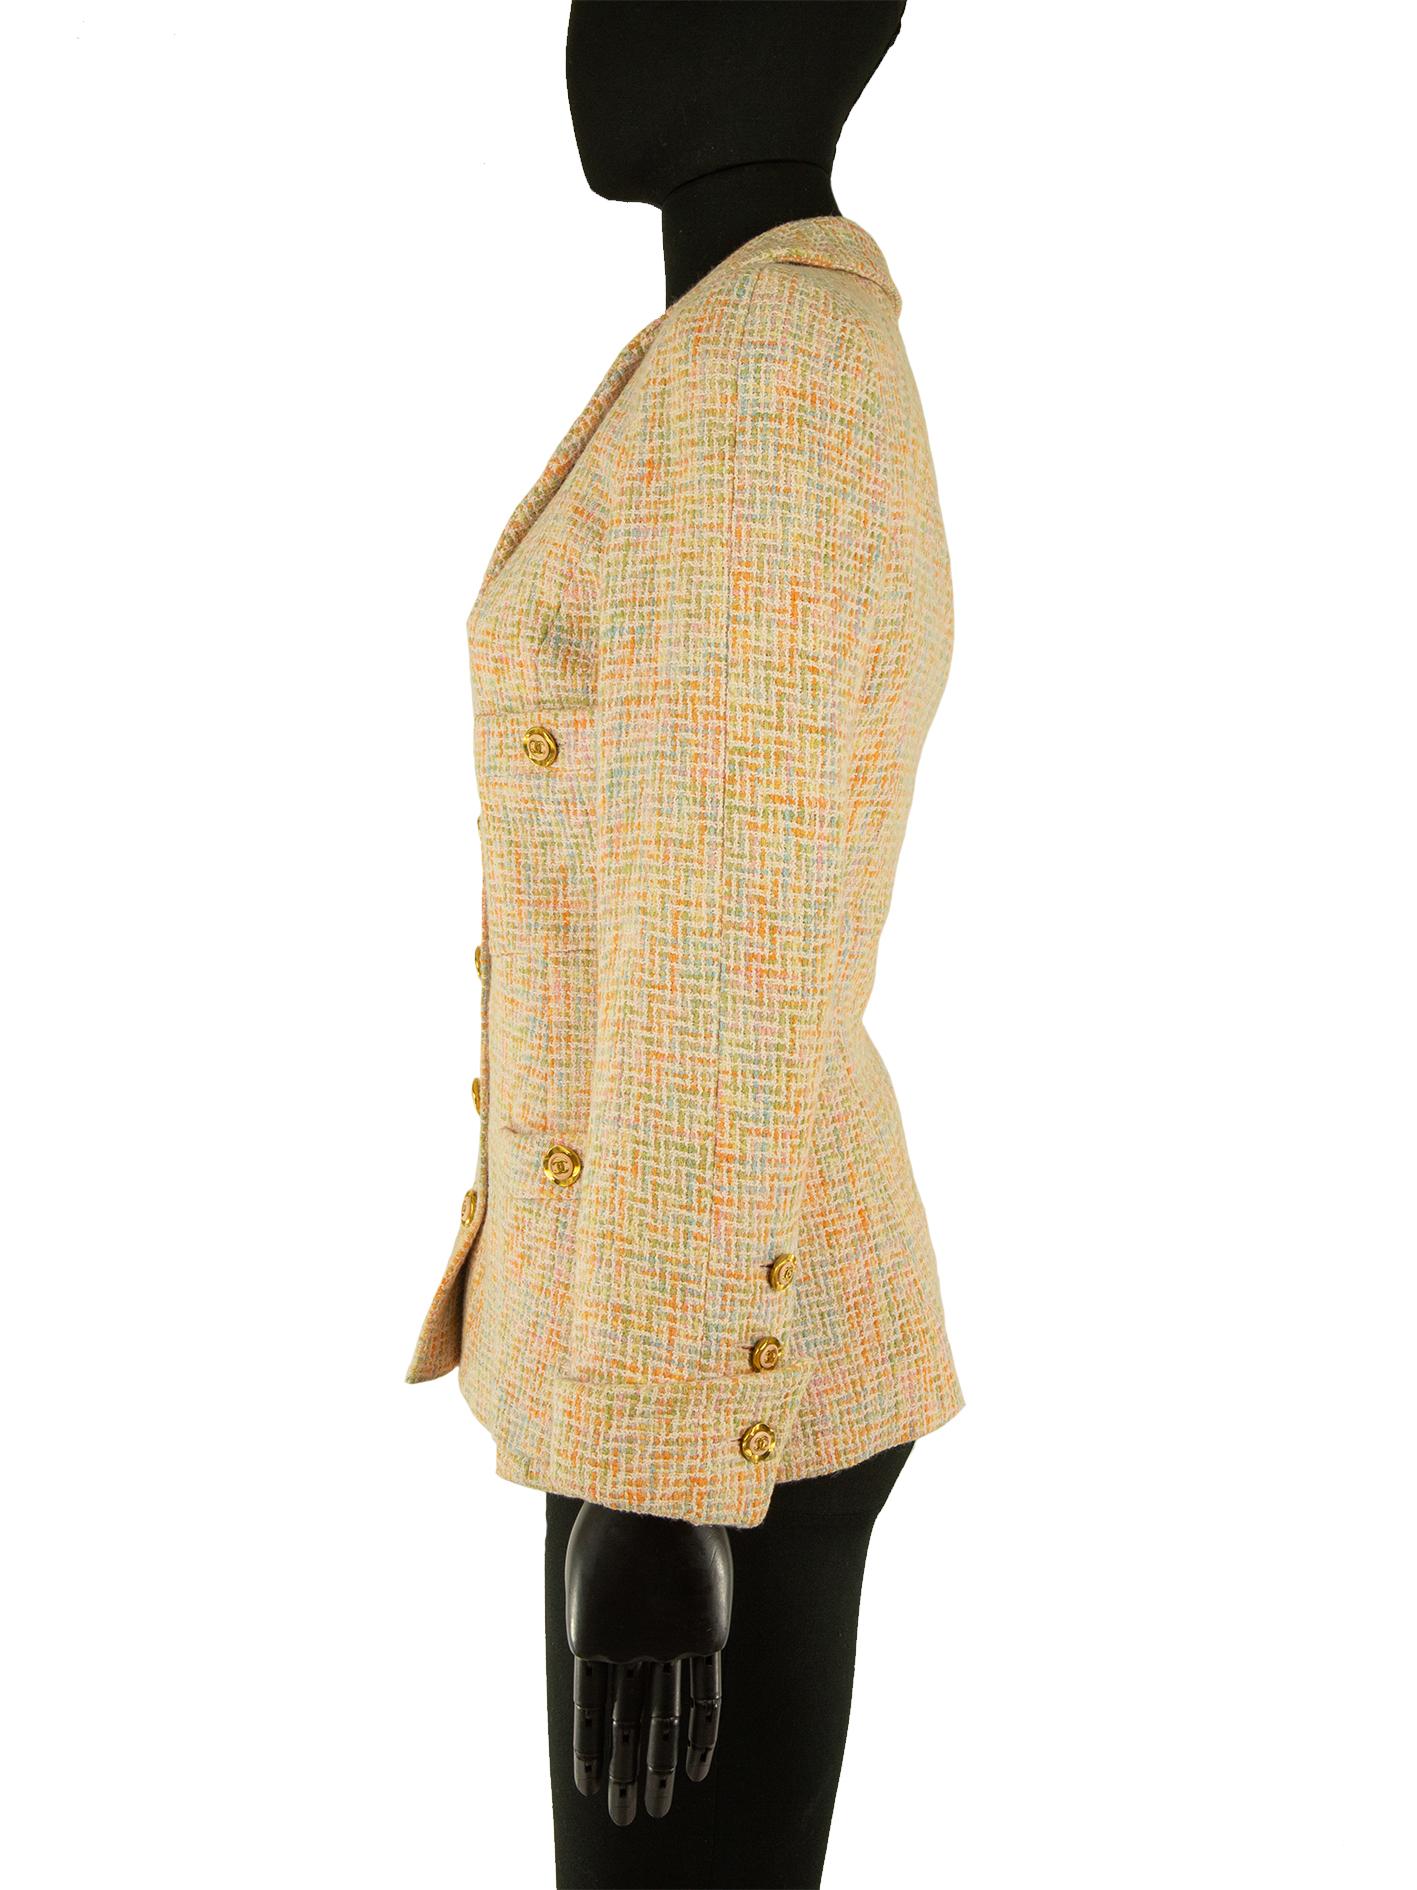 A Chanel jacket from the 1980s, in orange, pink, blue and green check tweed. The bodice is sewn with tailored princess seams making the silhouette fitted. The neckline is wide with a standard collar and the jacket also has four front pockets. The